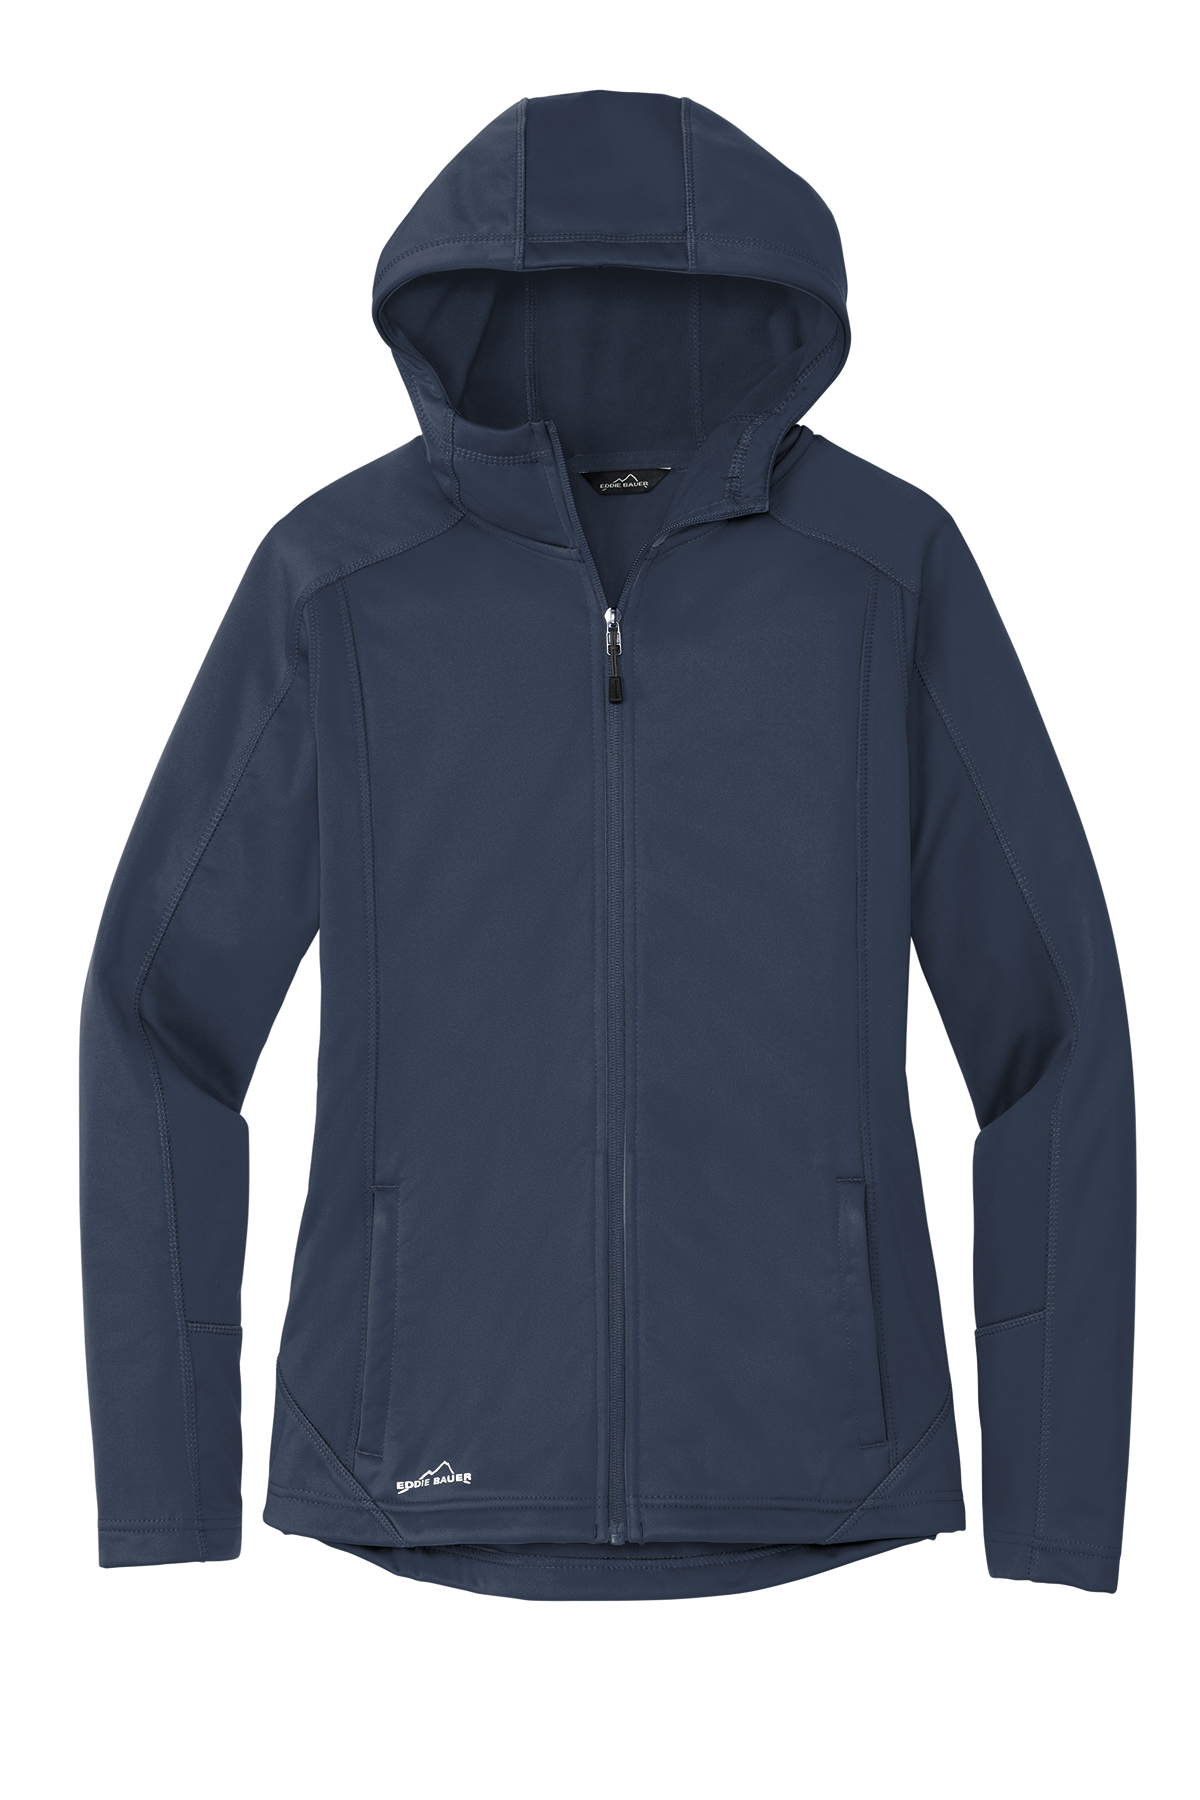 Eddie Bauer Ladies Company Casuals Trail Soft Shell | | Jacket Product